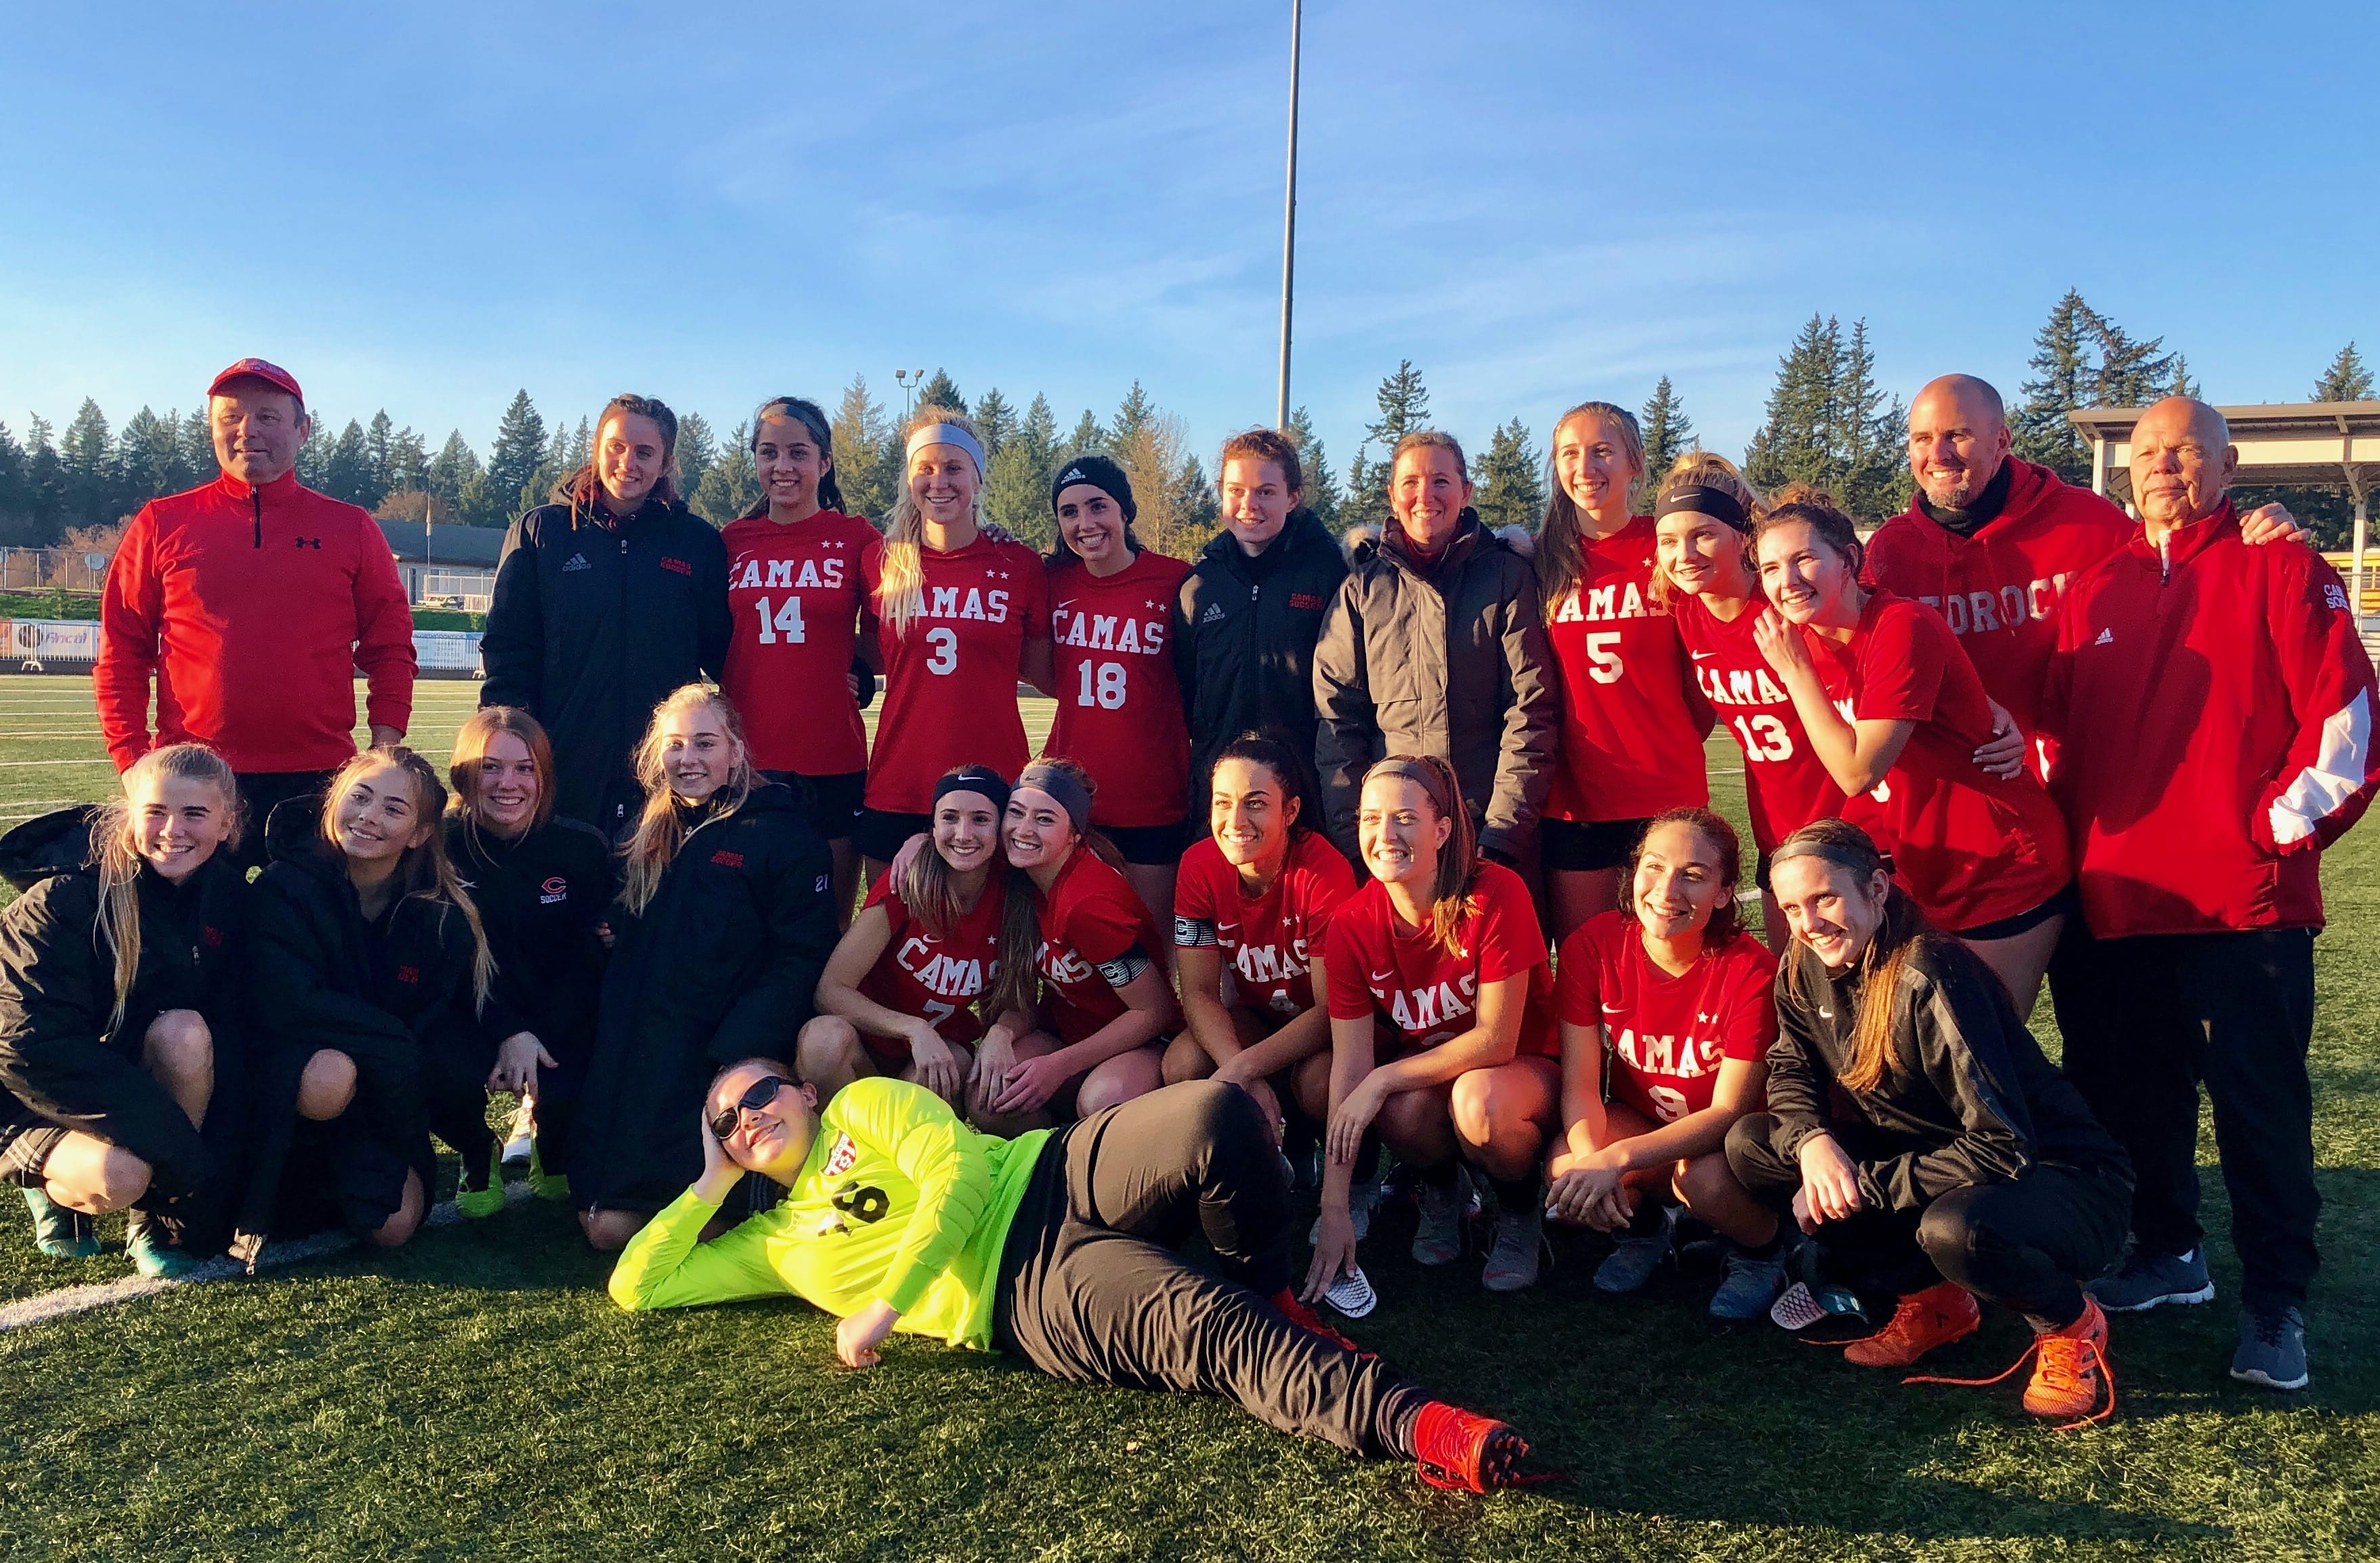 The Camas girls soccer team poses with coach Roland Minder after a 4-2 win over Bellarmine Prep in the 4A state quarterfinals at Doc Harris Stadium. On Saturday, Nov. 10, 2018.